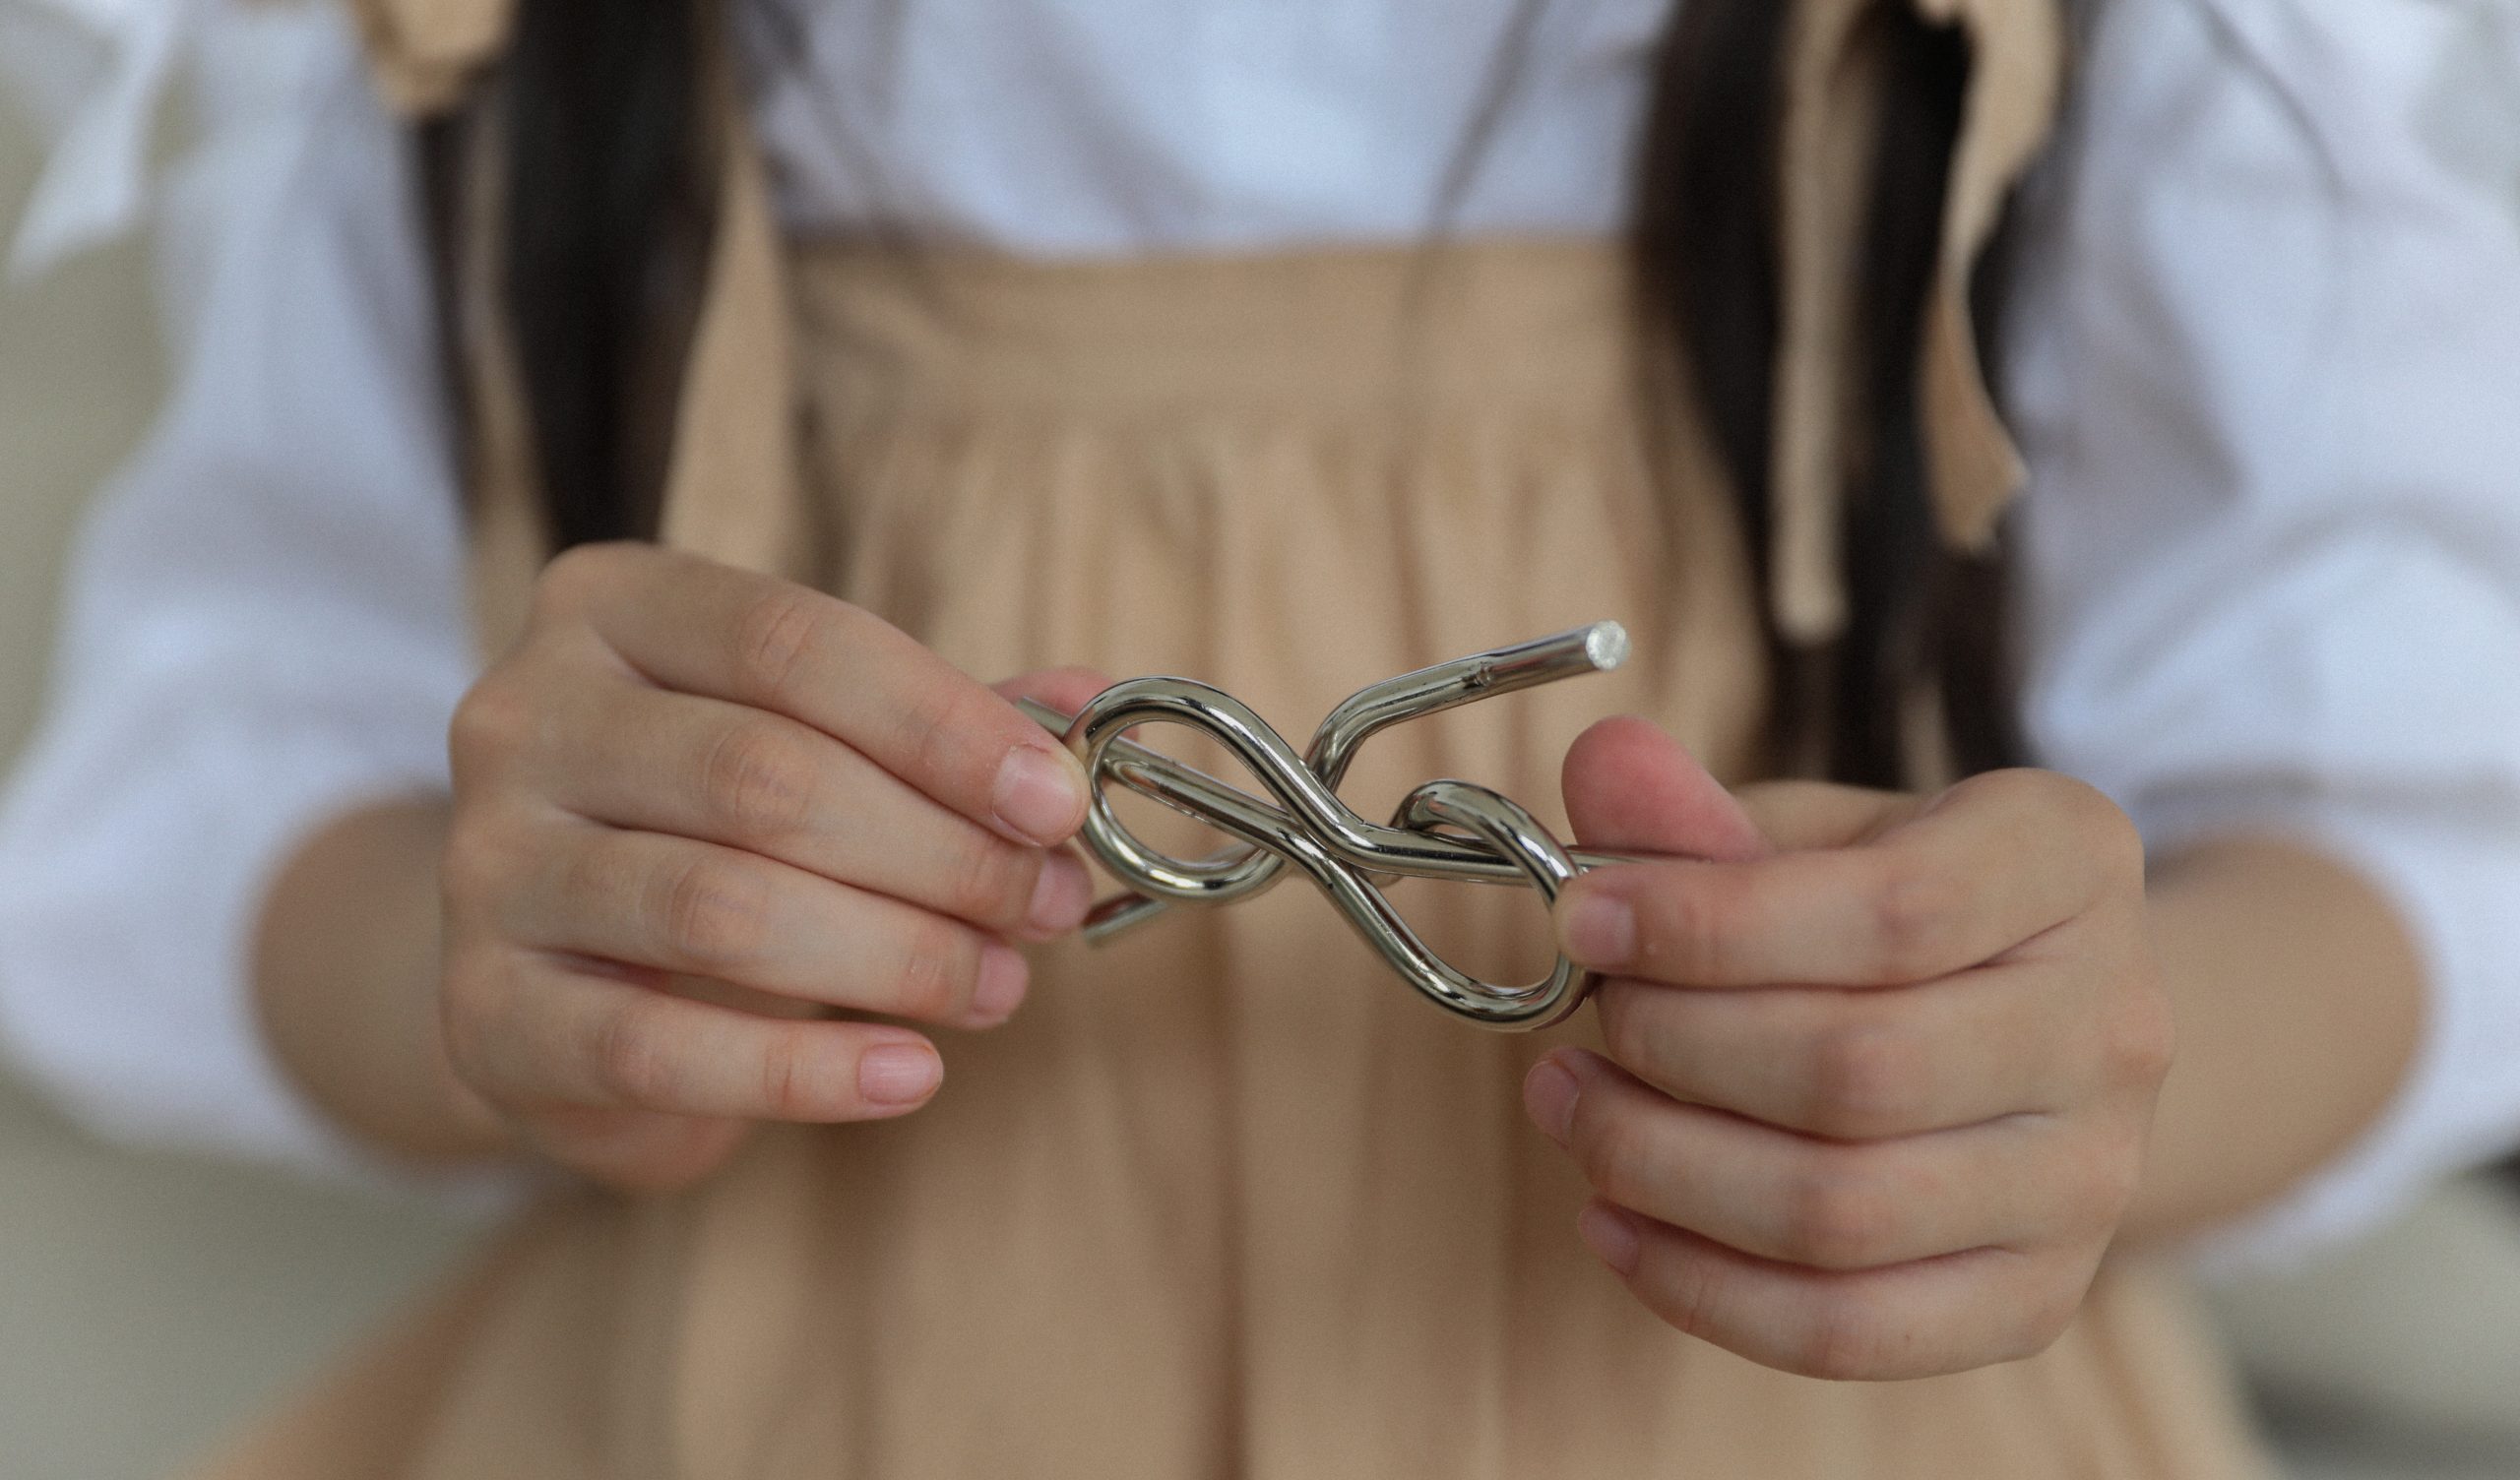 close up image of two hands holding a twisted metal tangle puzzle